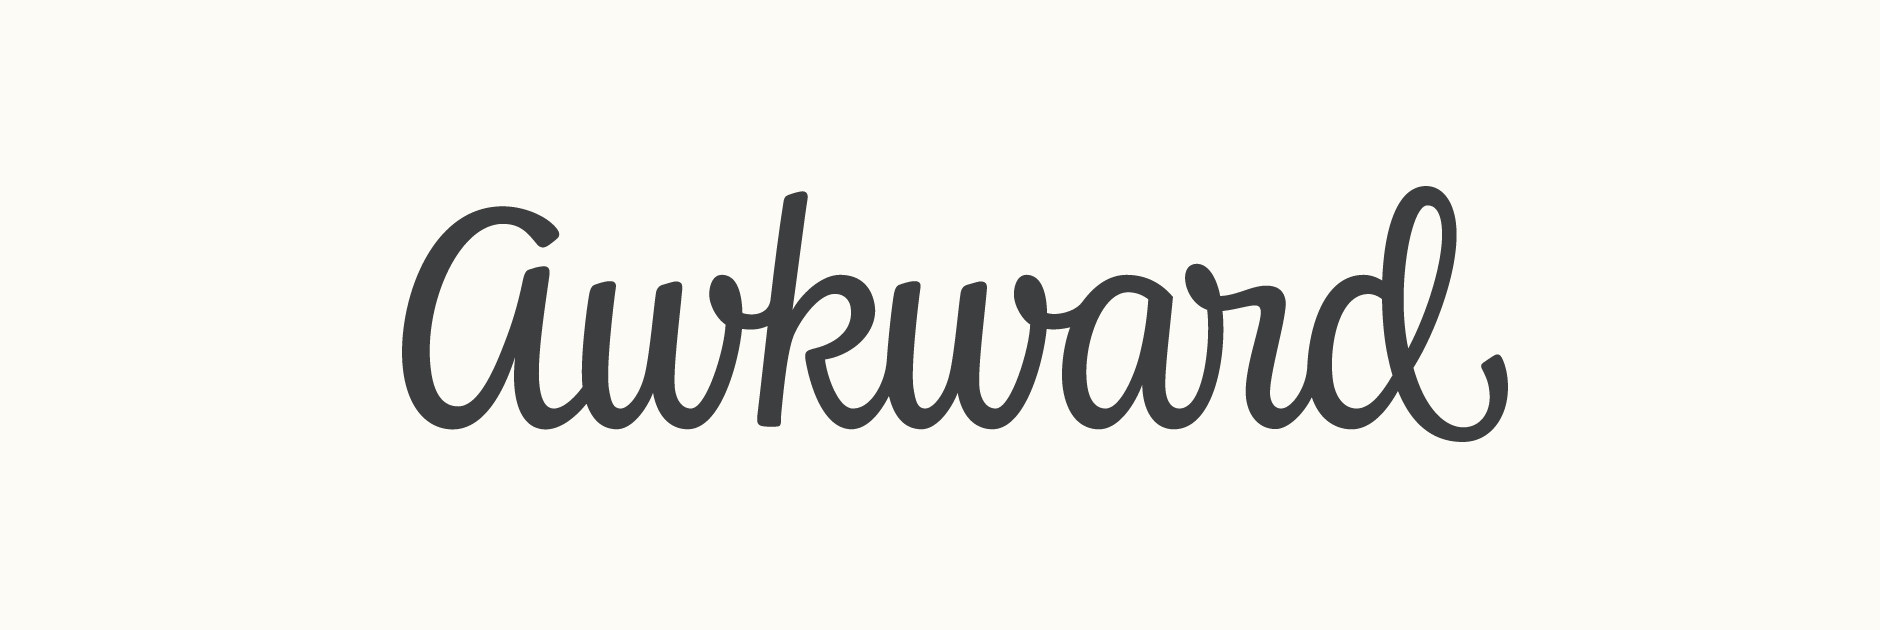 Awkward Logo - Claire Coullon // Graphic Design, Typography & Lettering